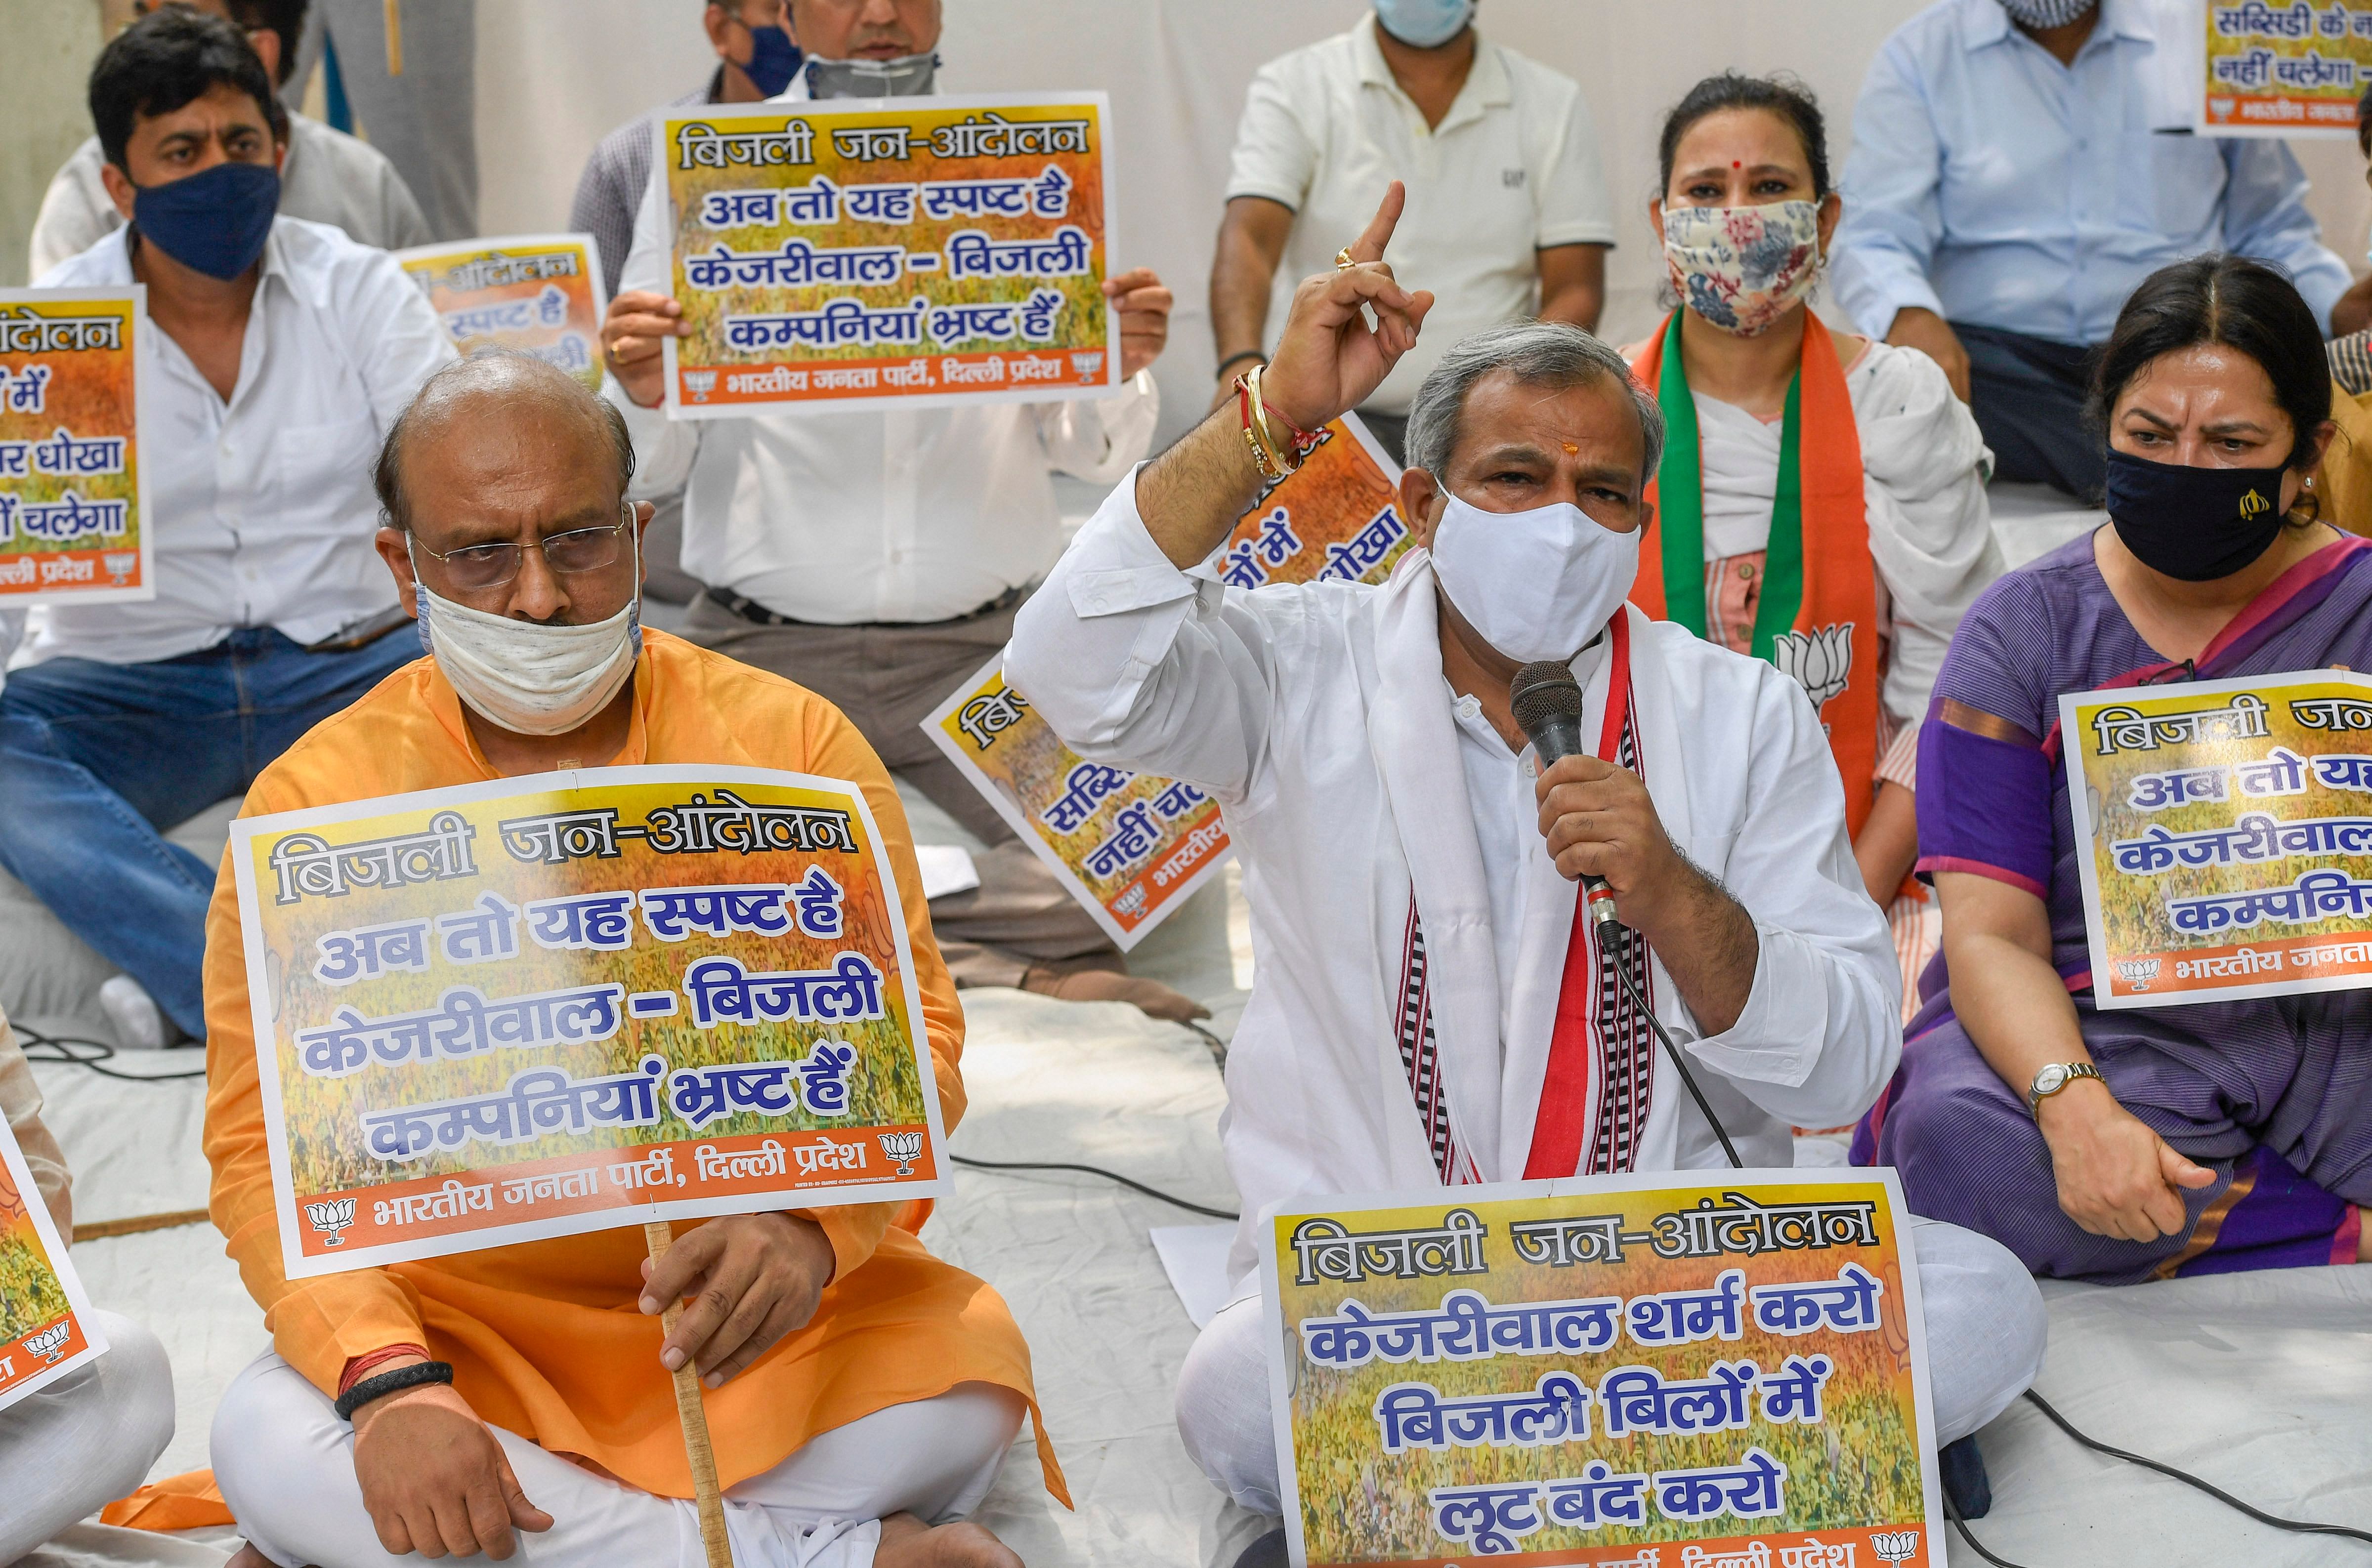 BJP Delhi President Adesh Gupta and senior leader Vijender Gupta display placards during a protest demonstration against the Arvind Kejriwal government, on the issue of allegedly inflated electricity bills, in Malviya Nagar in New Delhi. Credits: PTI Photo